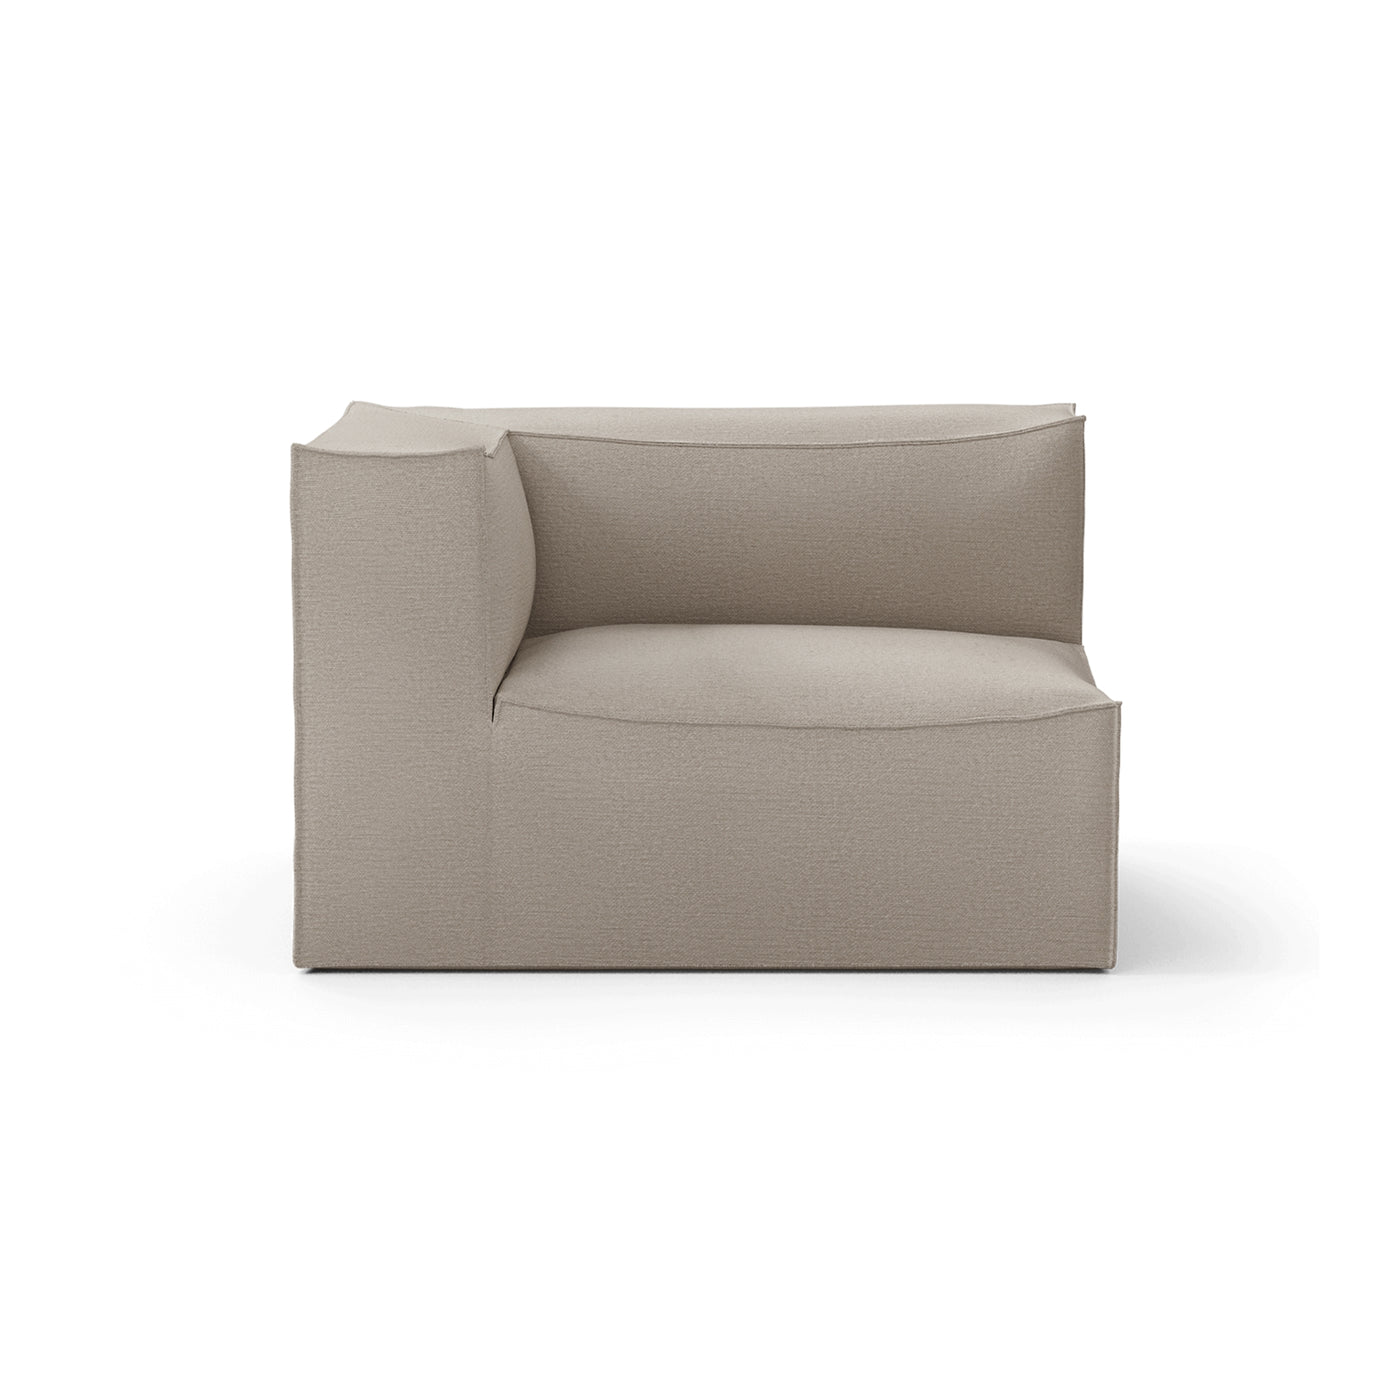 ferm LIVING Catena modular sofa small in cotton linen. Made to order from someday designs. #colour_cotton-linen